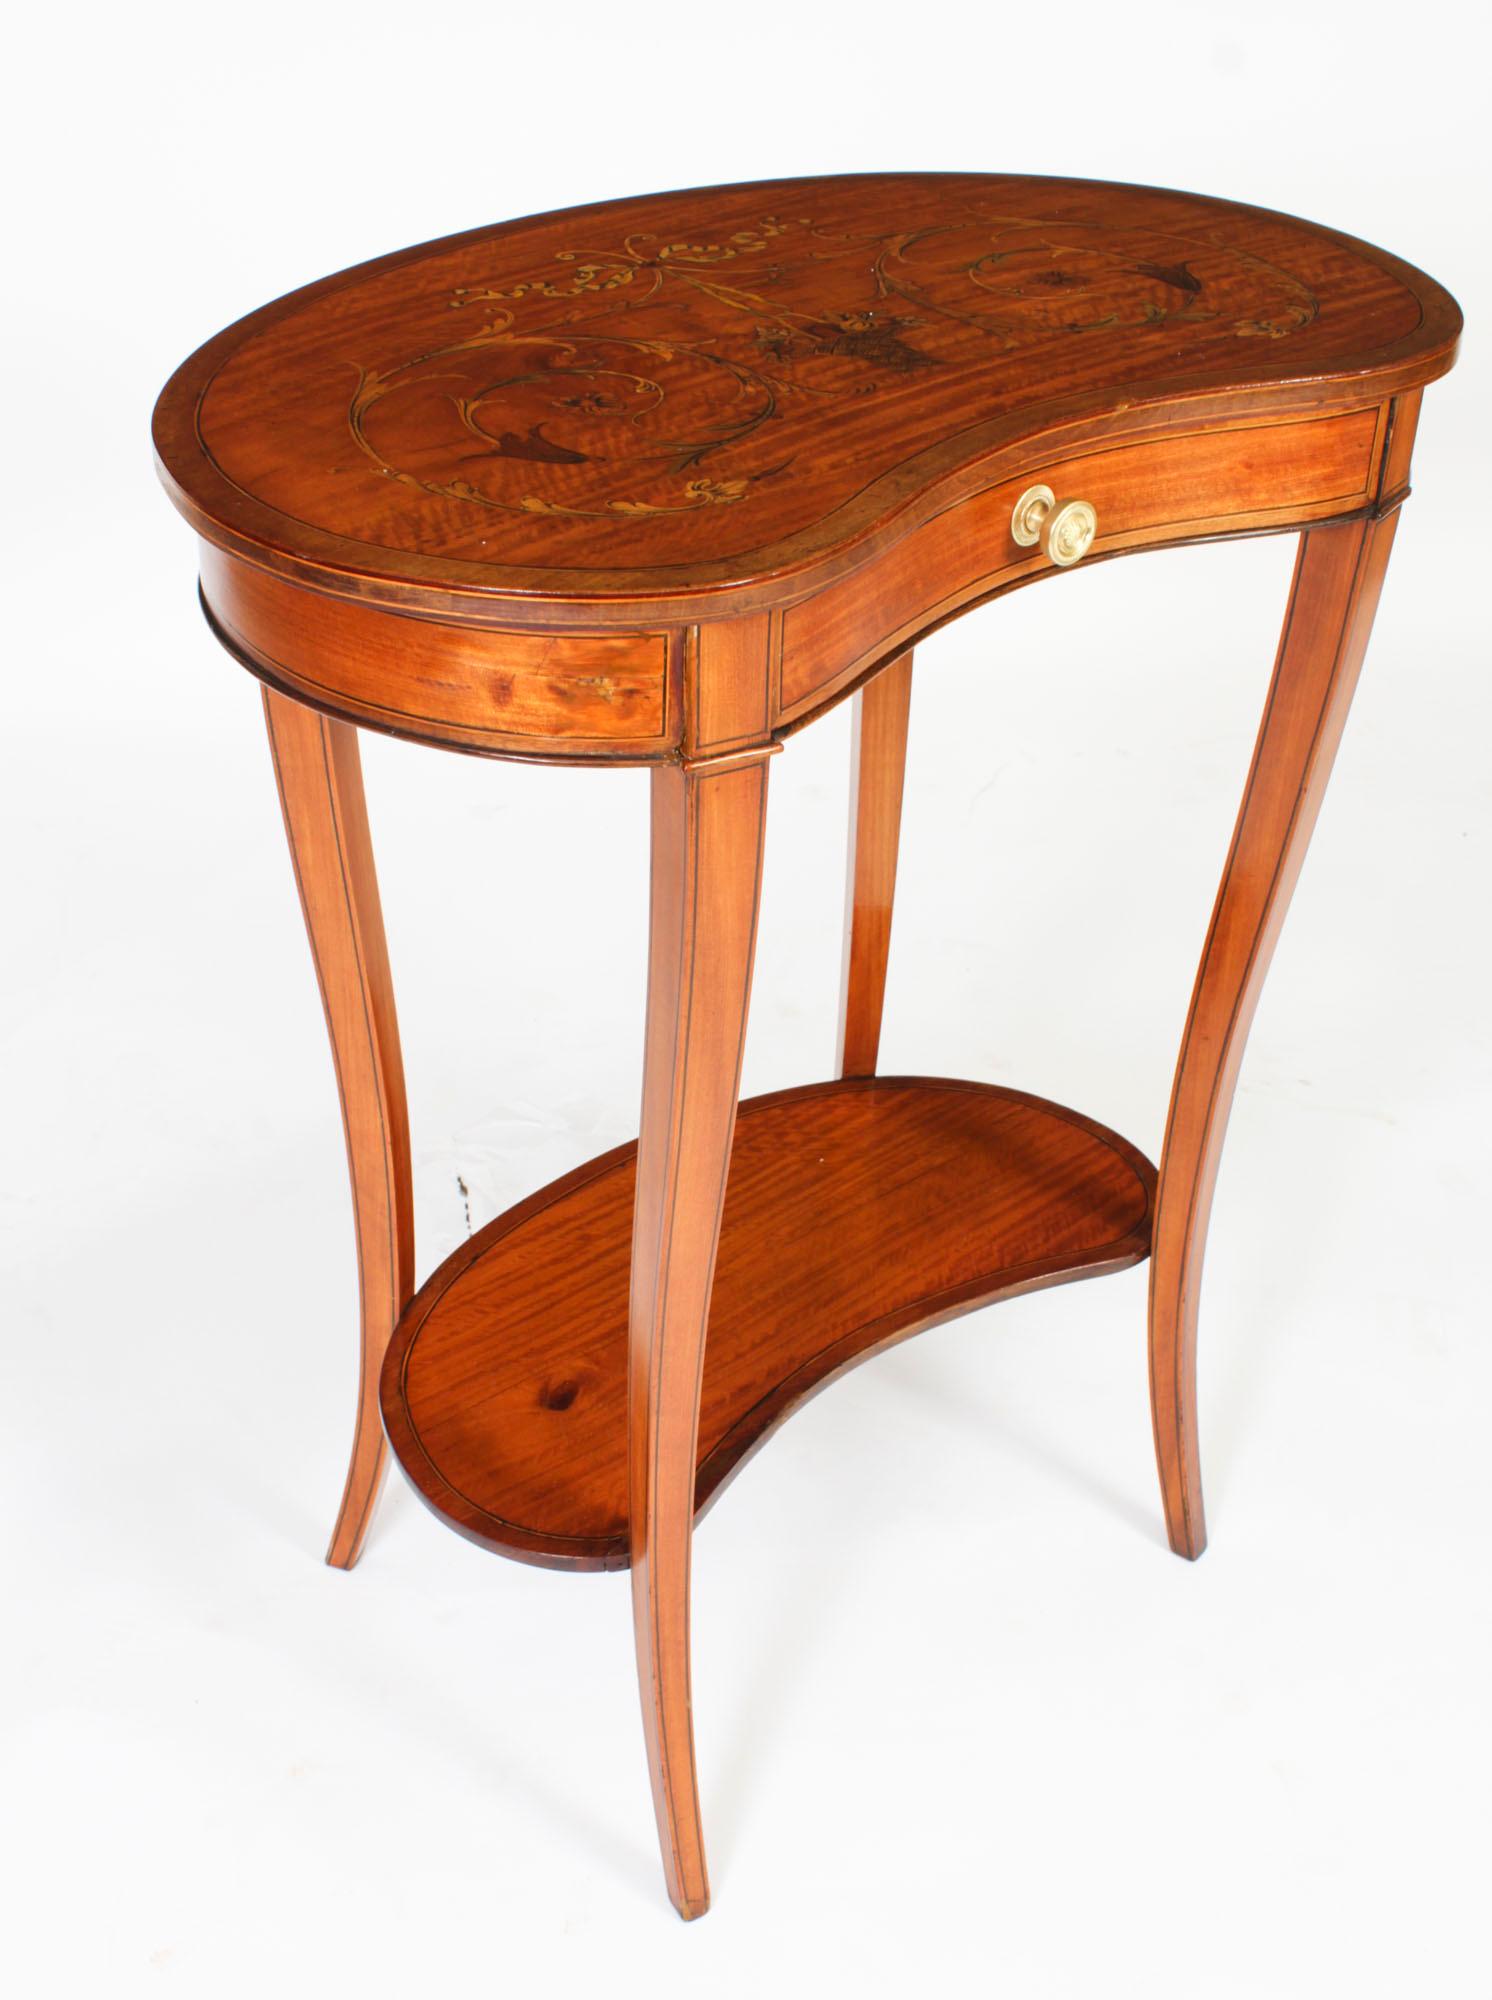 Antique English Marquetry Kidney Shaped Occasionally Tables 19th Century For Sale 5